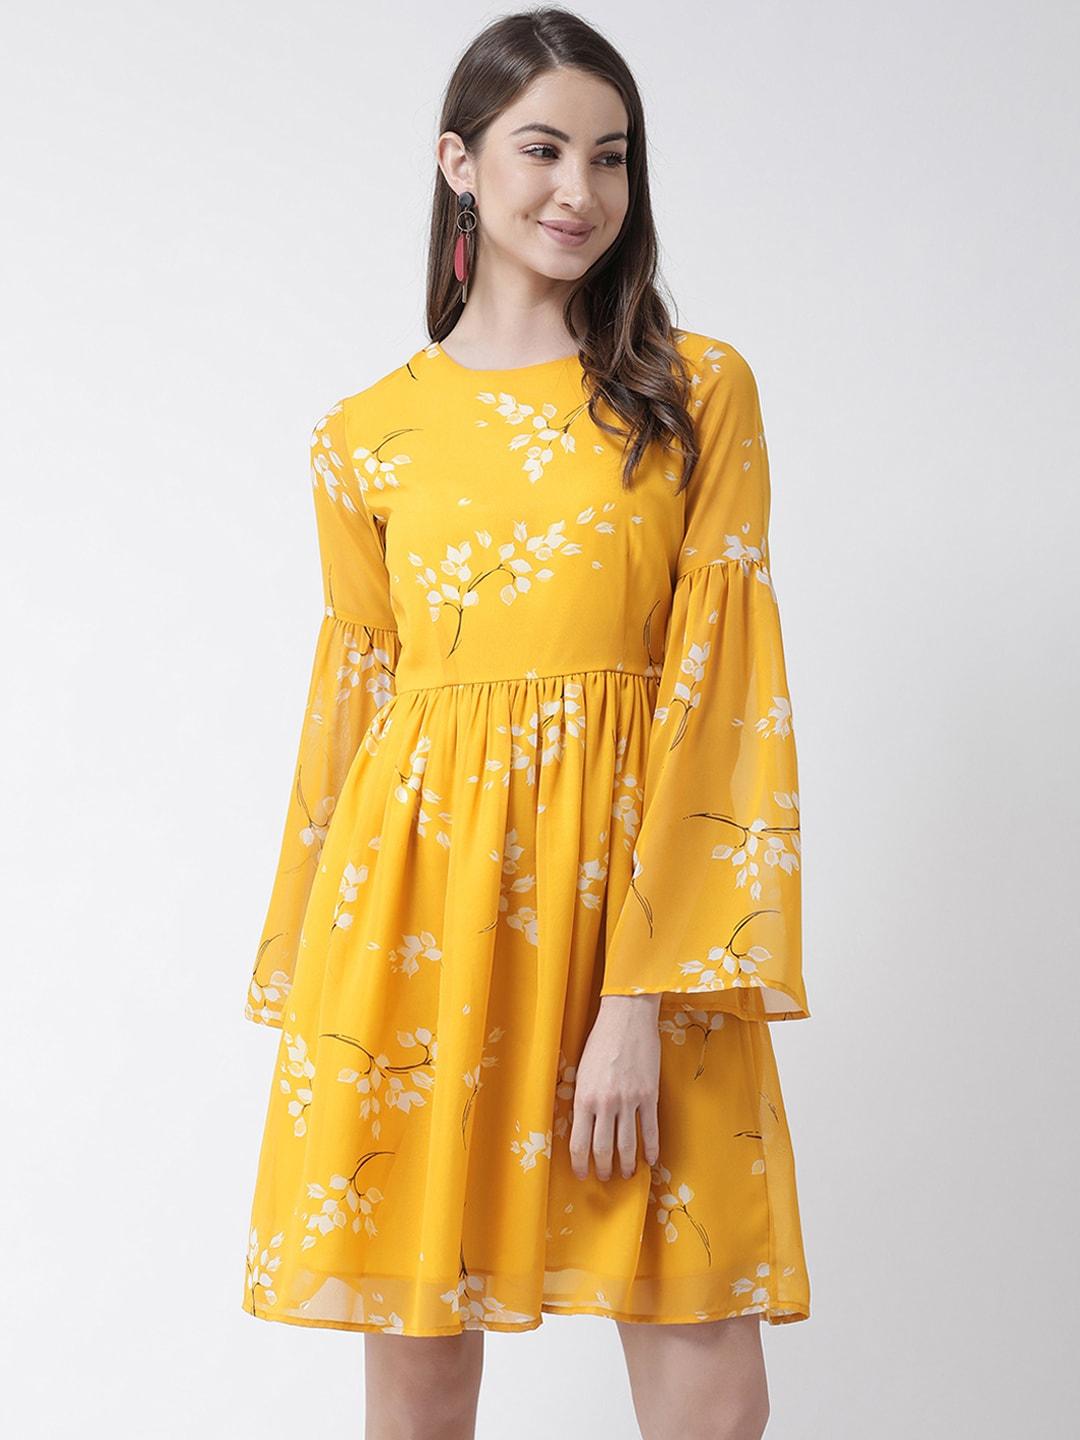 KASSUALLY Women Yellow Printed Fit and Flare Dress